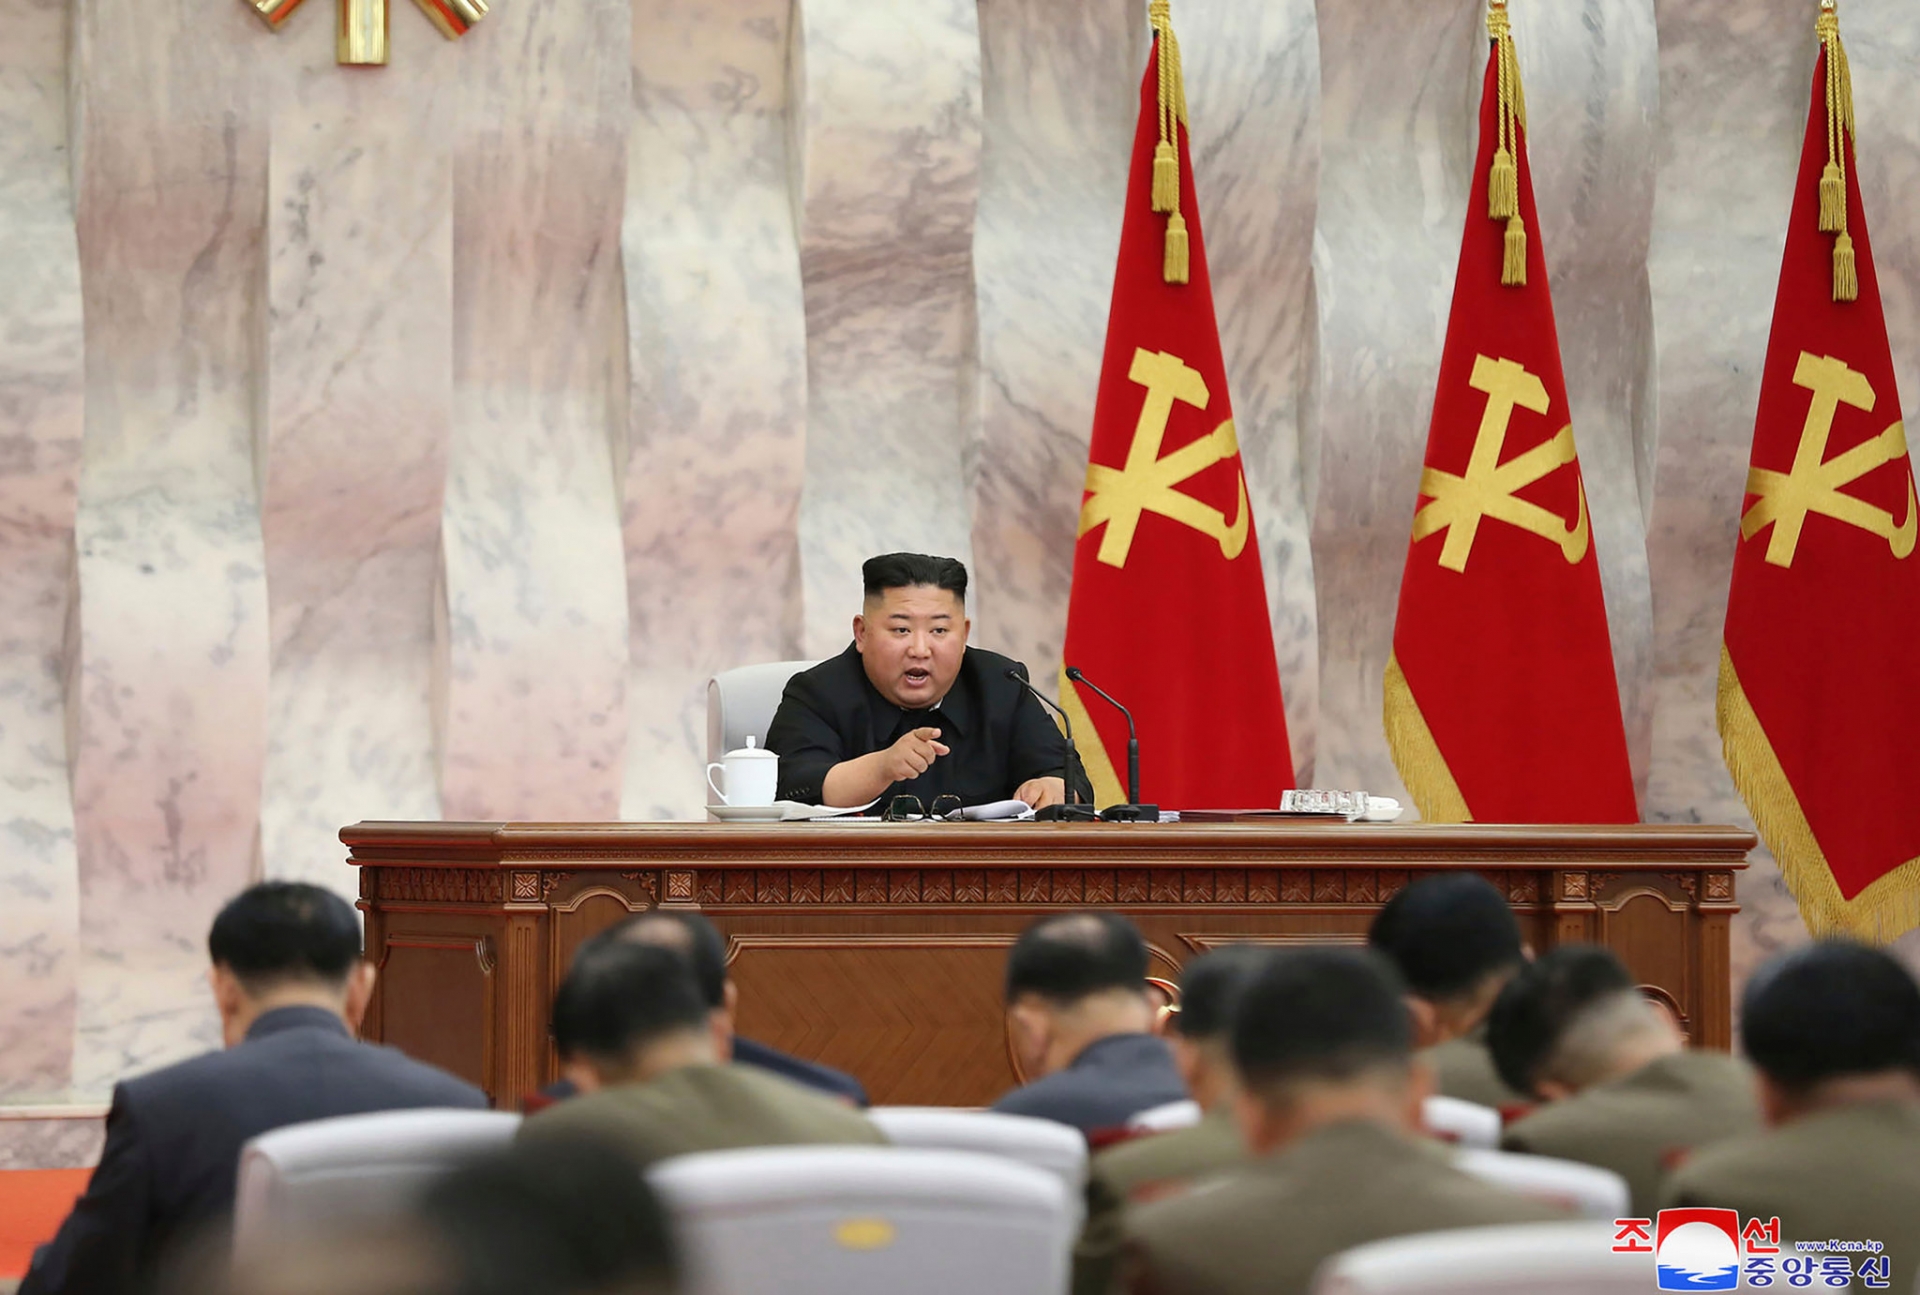 world news today kim jong un moves to increase north koreas nuclear strength